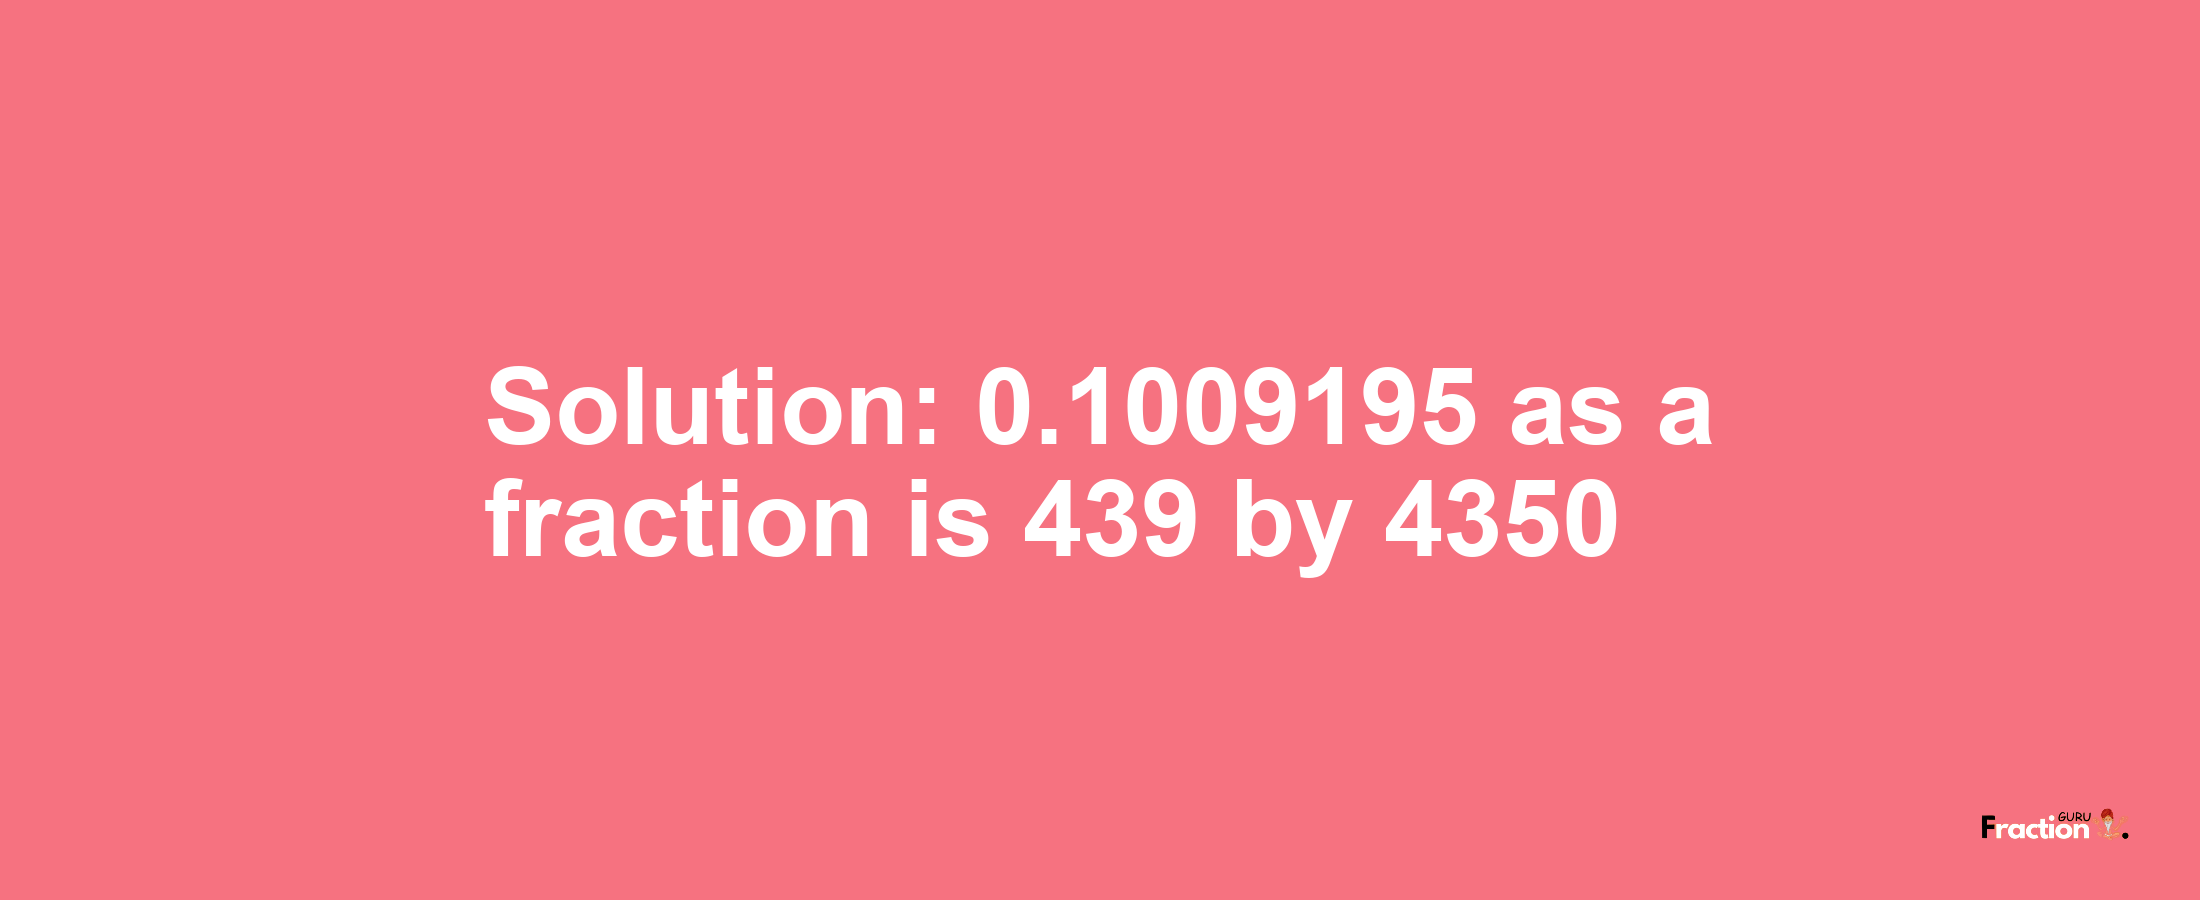 Solution:0.1009195 as a fraction is 439/4350